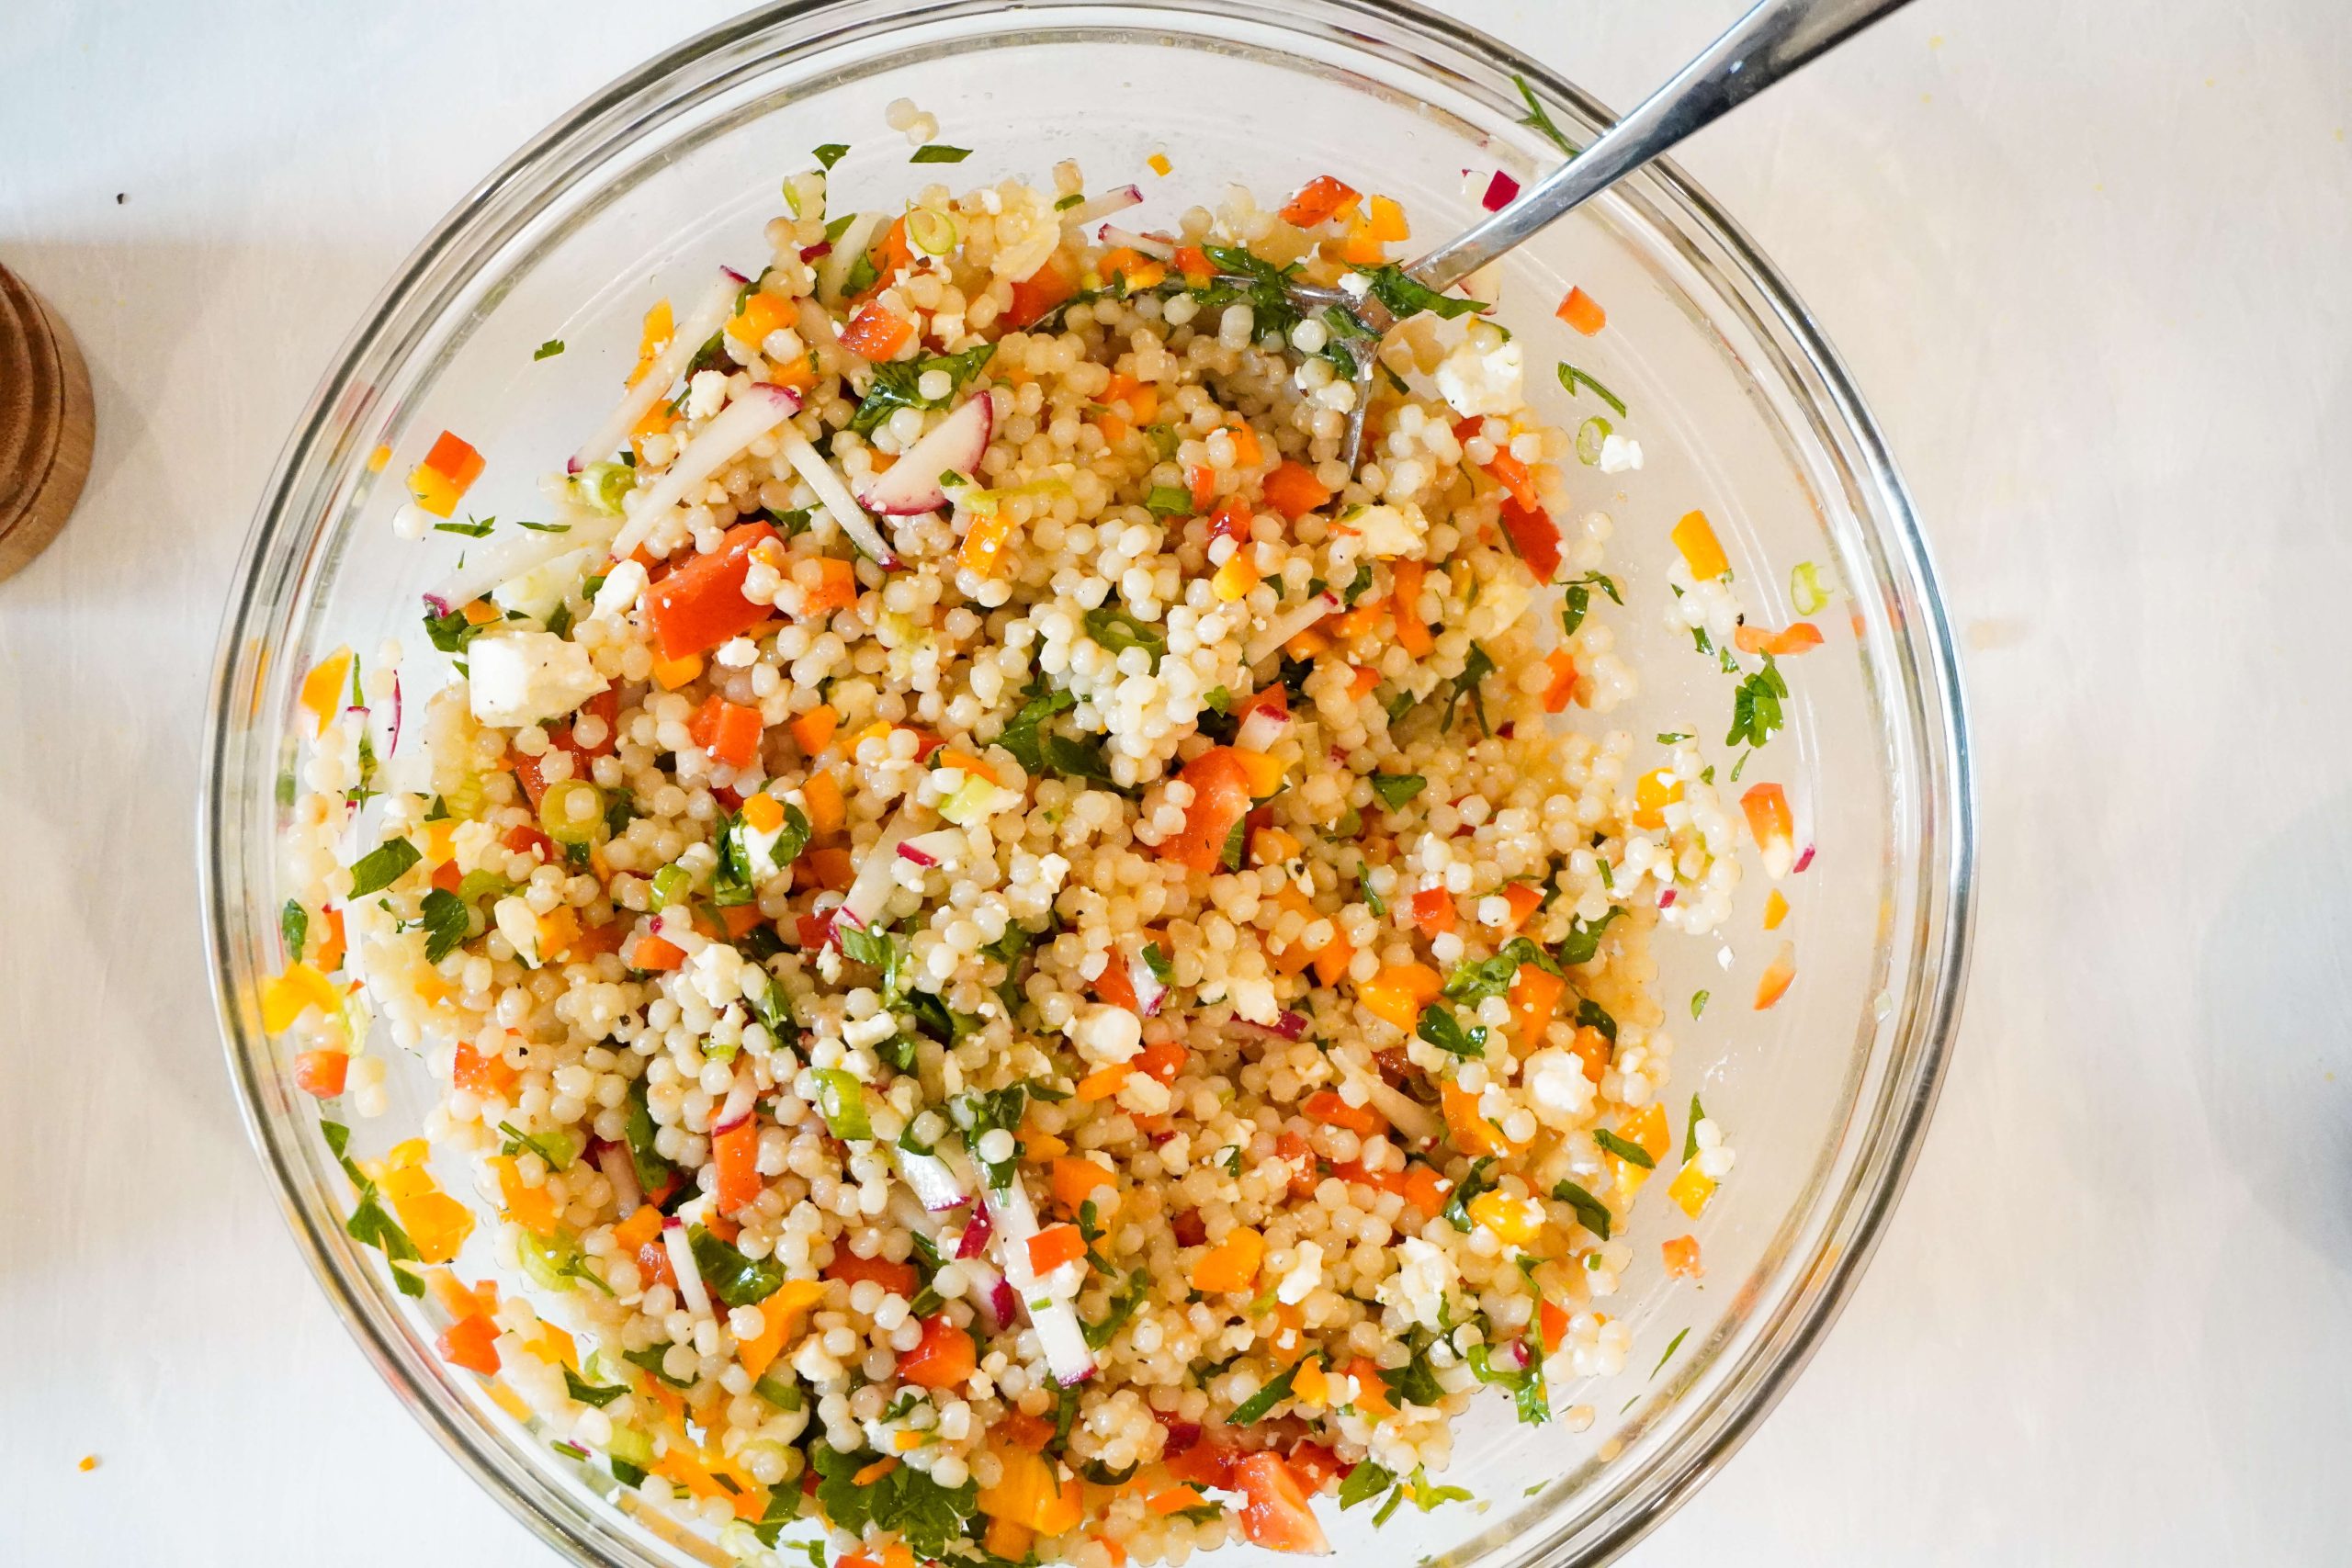 Couscous salad mixed with all the vegetables and vinaigrette